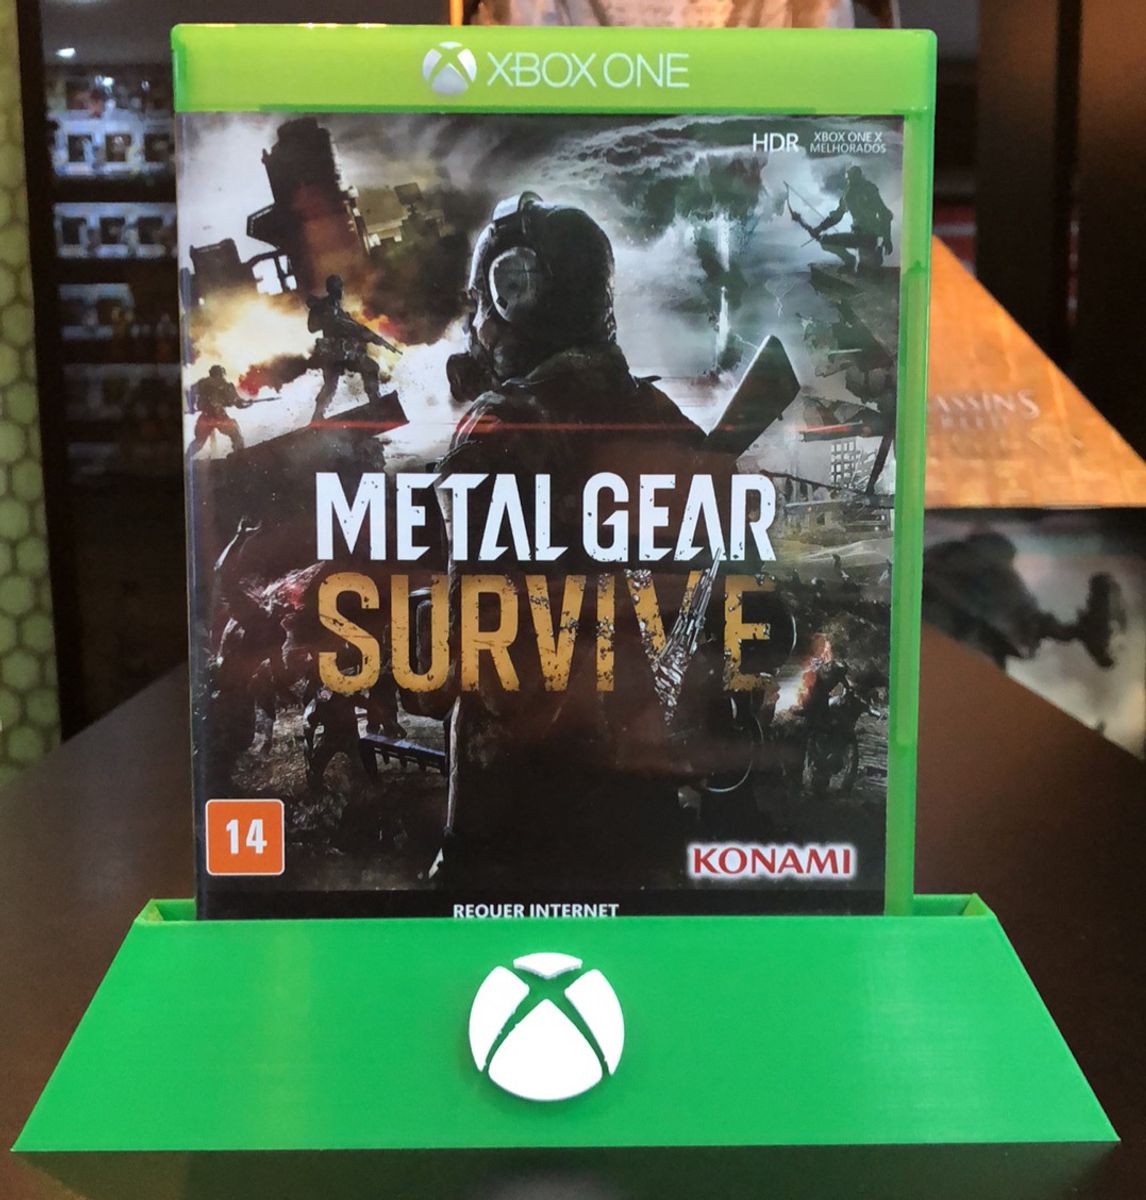 Metal Gear Survive - Xbox One, Xbox One